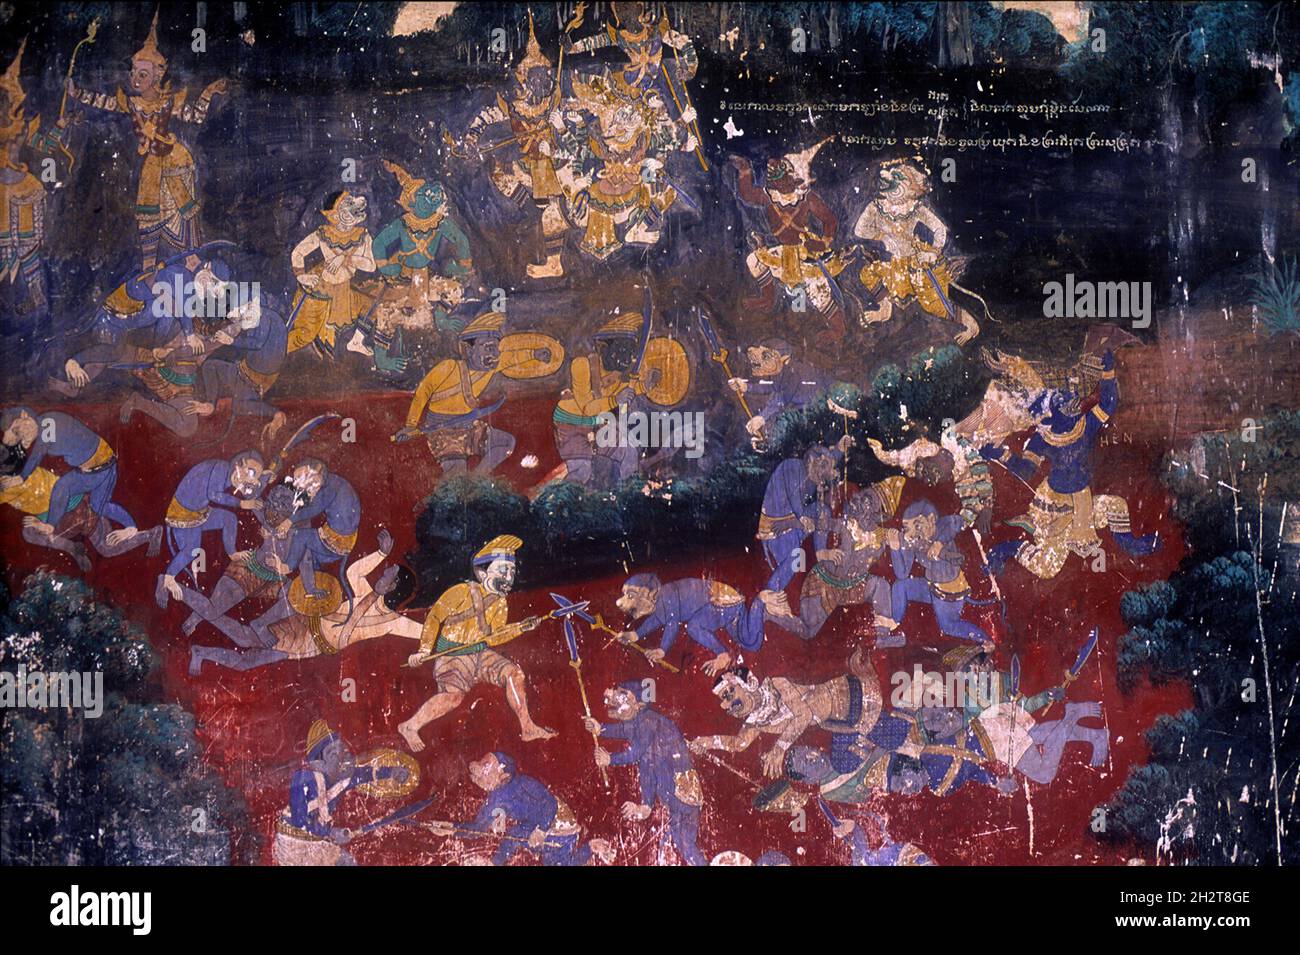 Mural of the Reamker poem showing war painted in 1903-1904 in poor condition, taken in 1995, Silver Pagoda, Phnom Penh, Cambodia, Asia Stock Photo